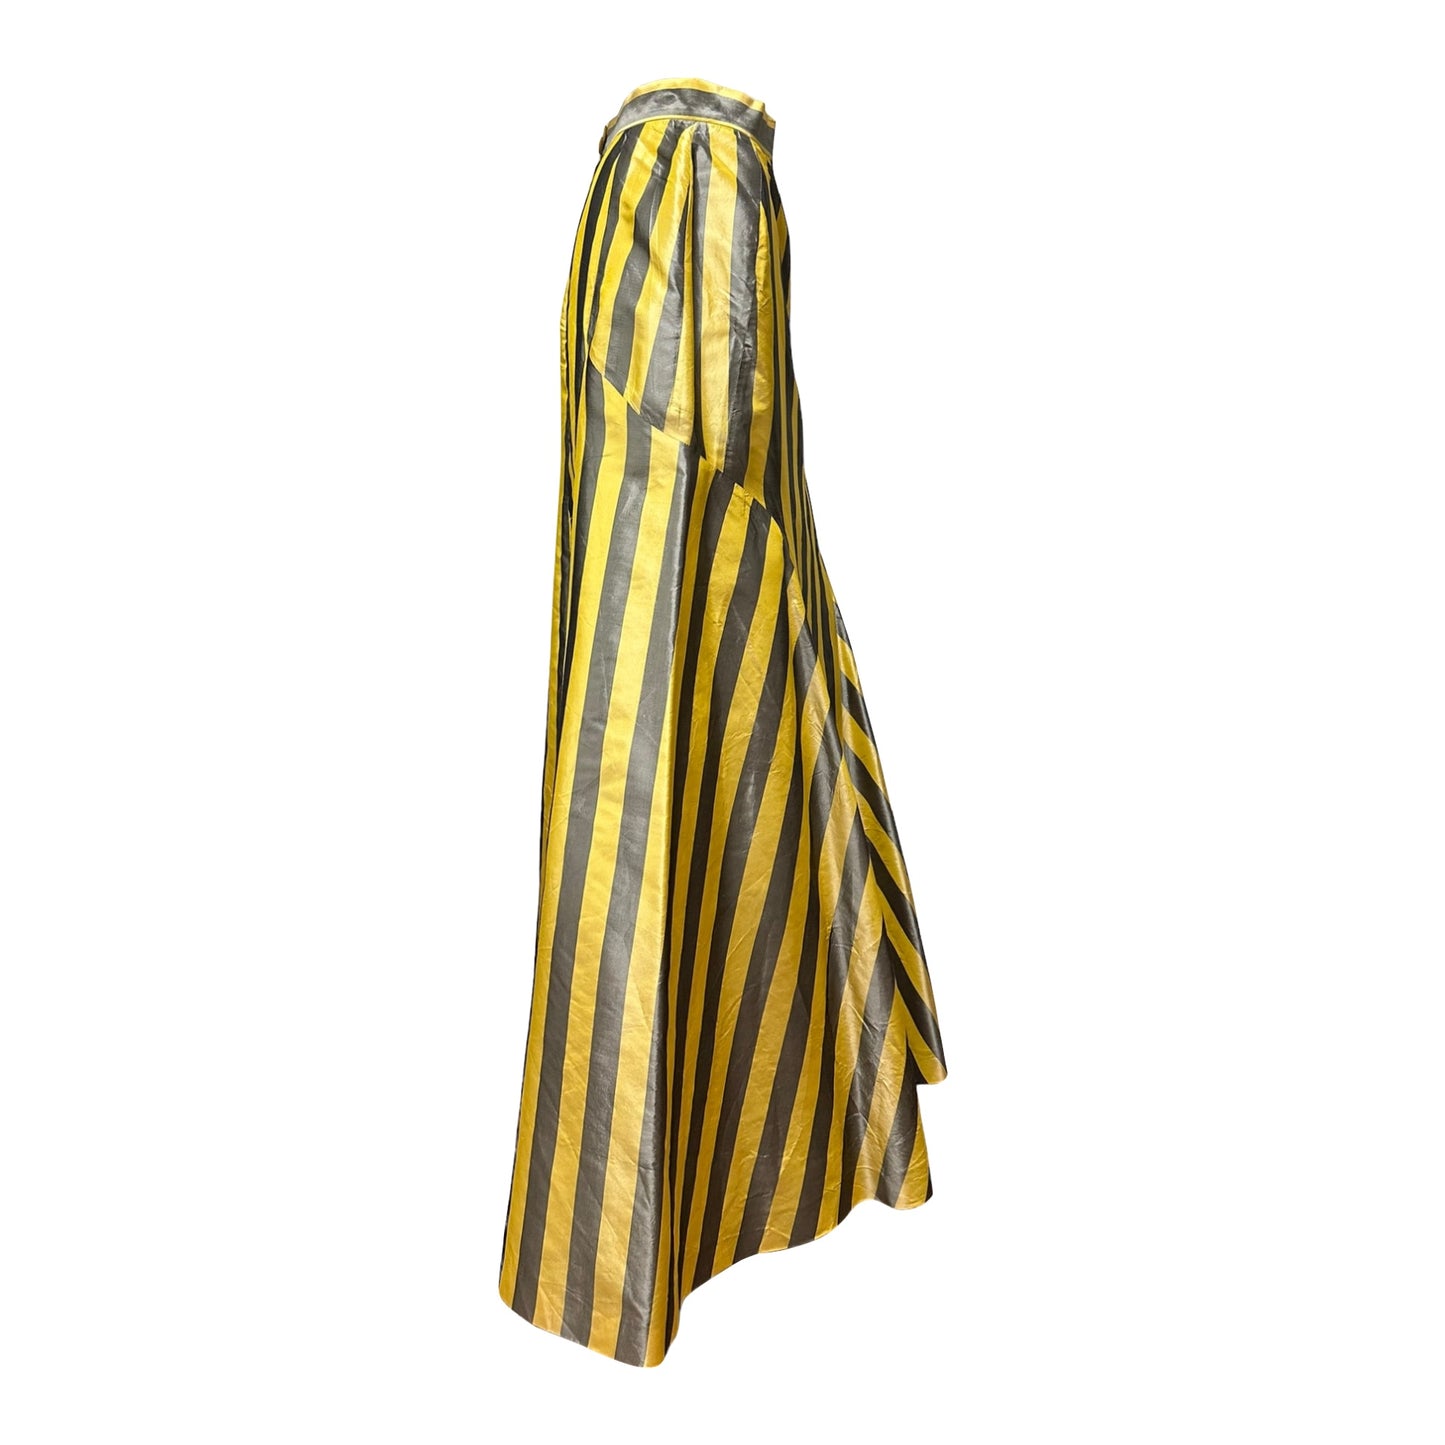 VIVIENNE WESTWOOD Spring Summer 1998 "Tied To The Mast" Striped Silk Flared Maxi Skirt